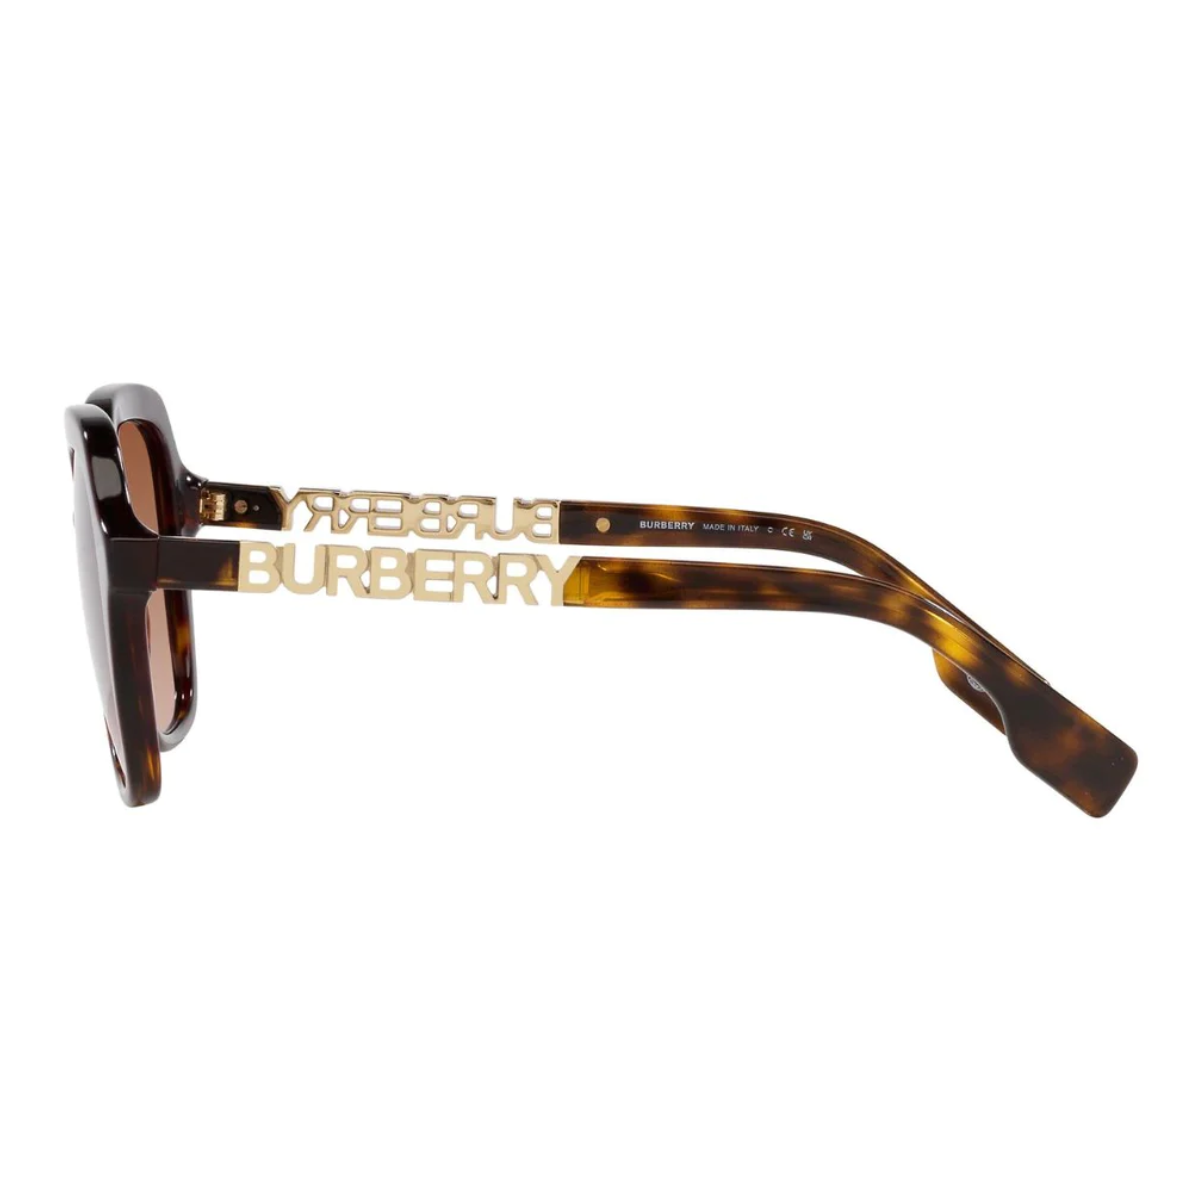 "Optorium's collection featuring Burberry 4389 3002/13 sunglasses with polarized lenses."